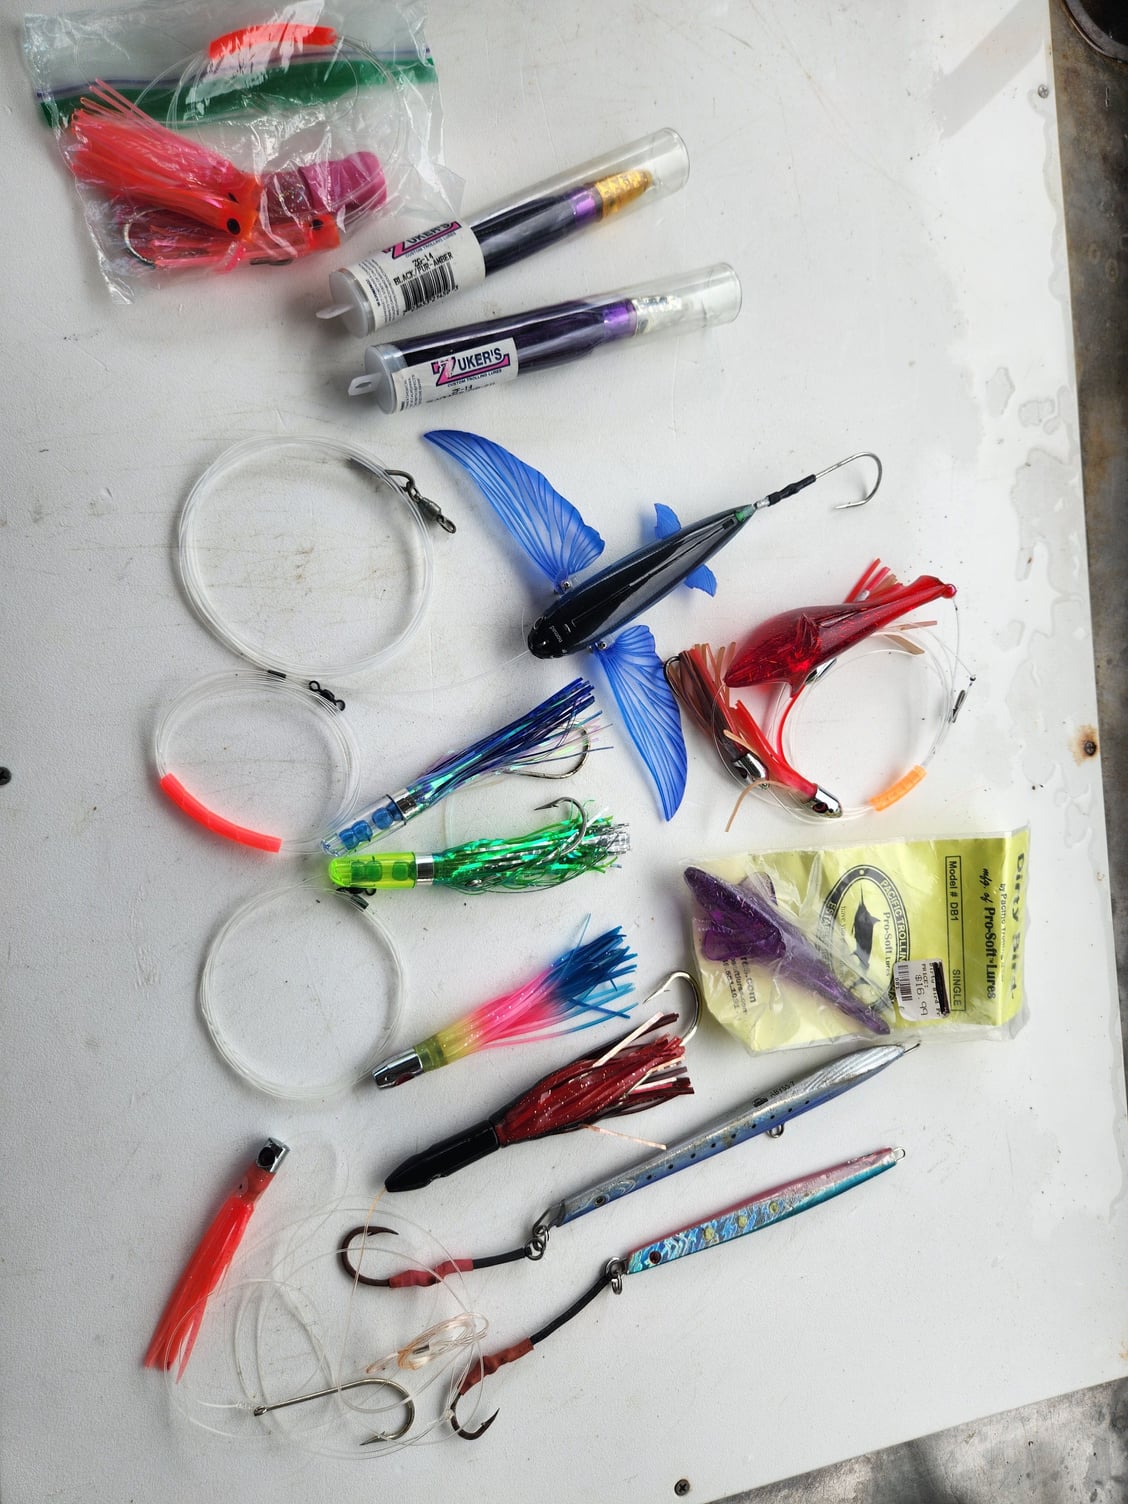 Trolling Lures, Shimano tackle bag, gaff etc. - The Hull Truth